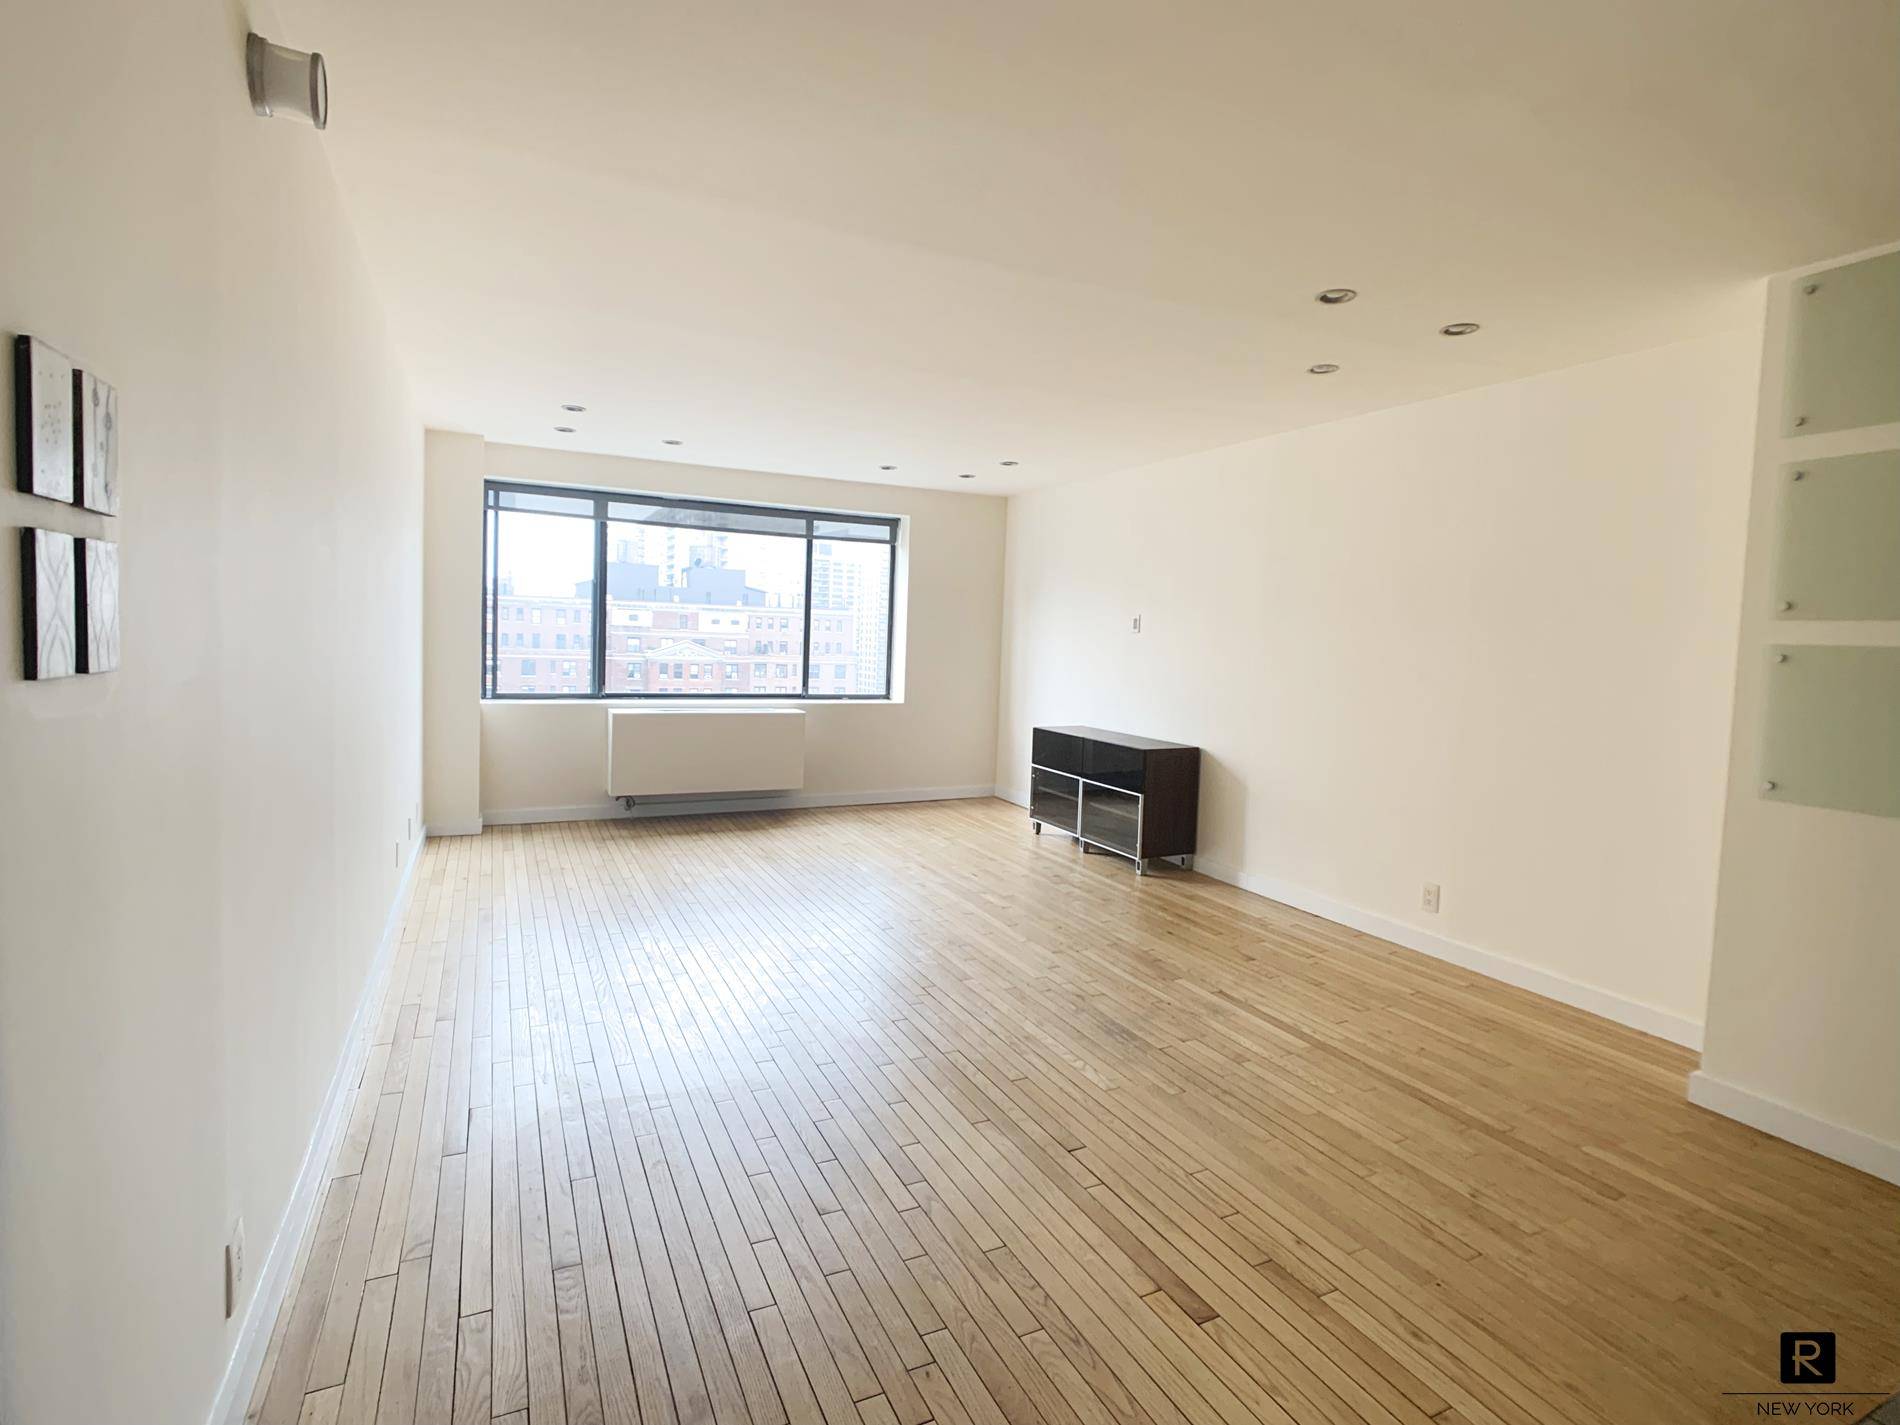 Sun Drenched Expansive High Floor 1 Bedroom with a bonus room and study area right in the heart of Upper West Side.